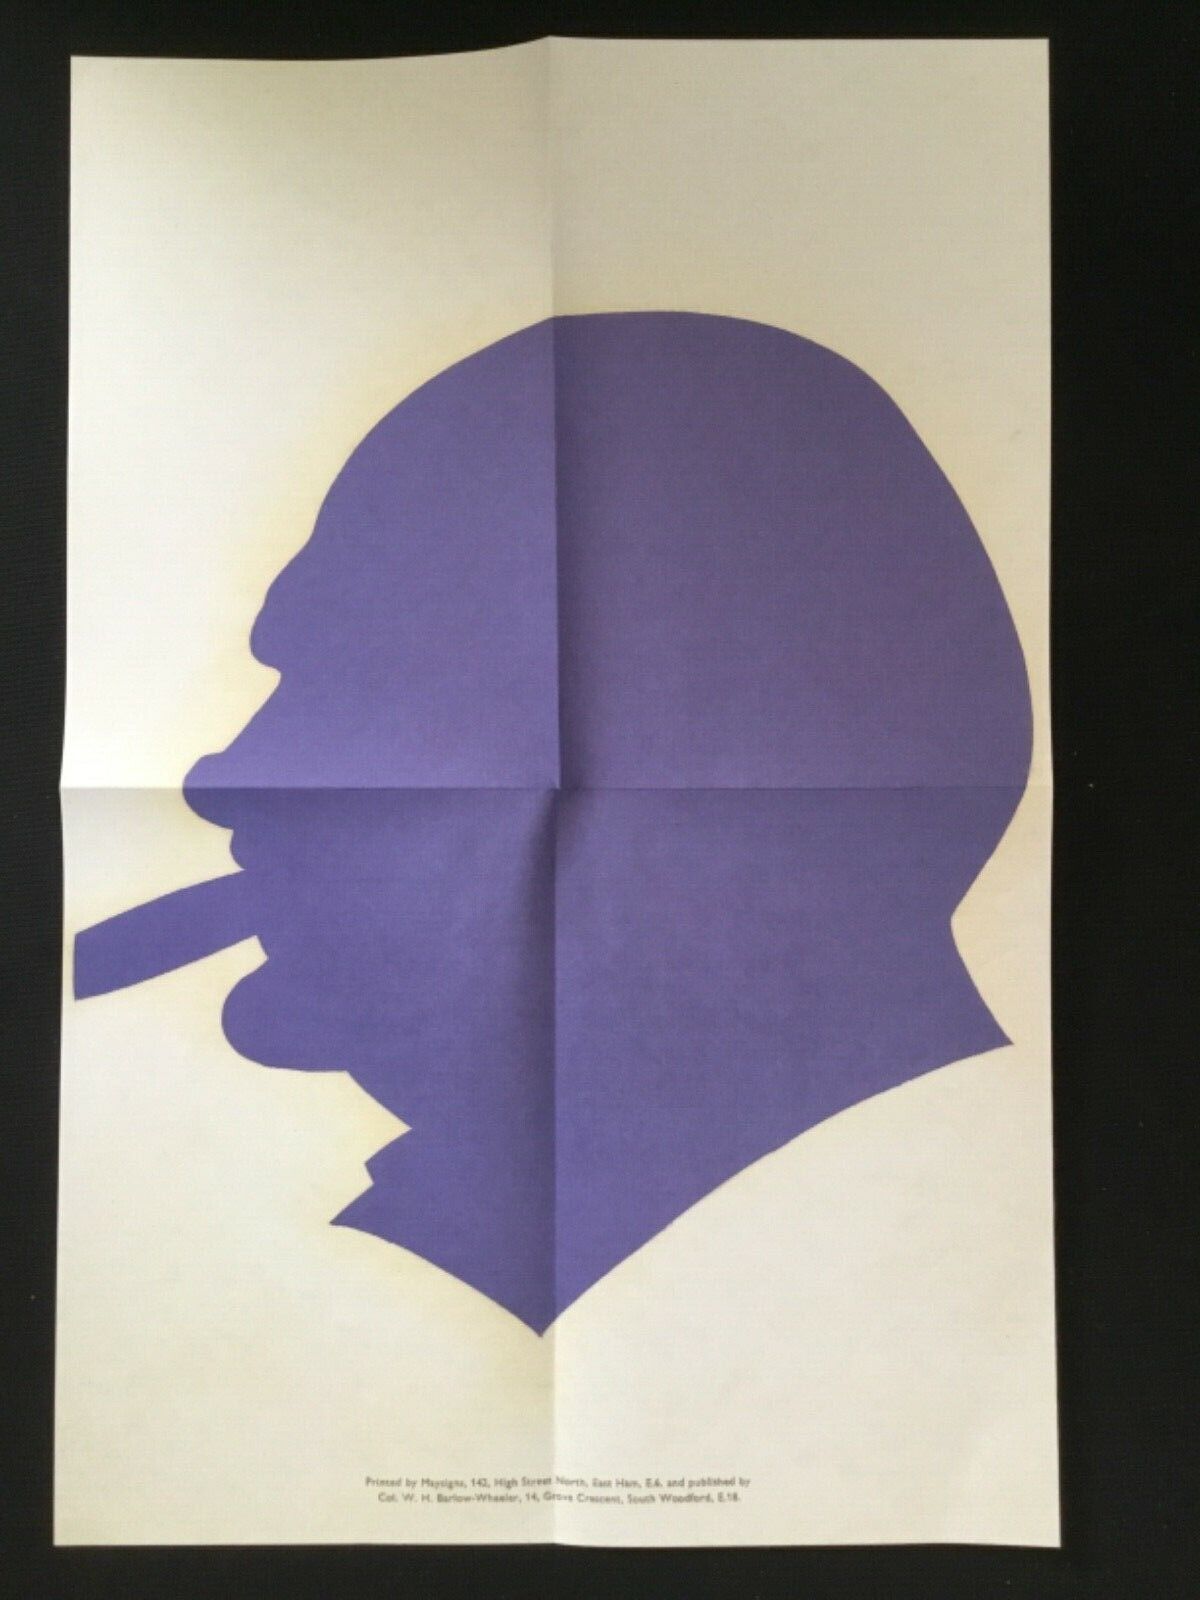 1950’S ELECTION POSTER OF A ICONIC SILHOUETTE OF WINSTON CHURCHILL (Repro)